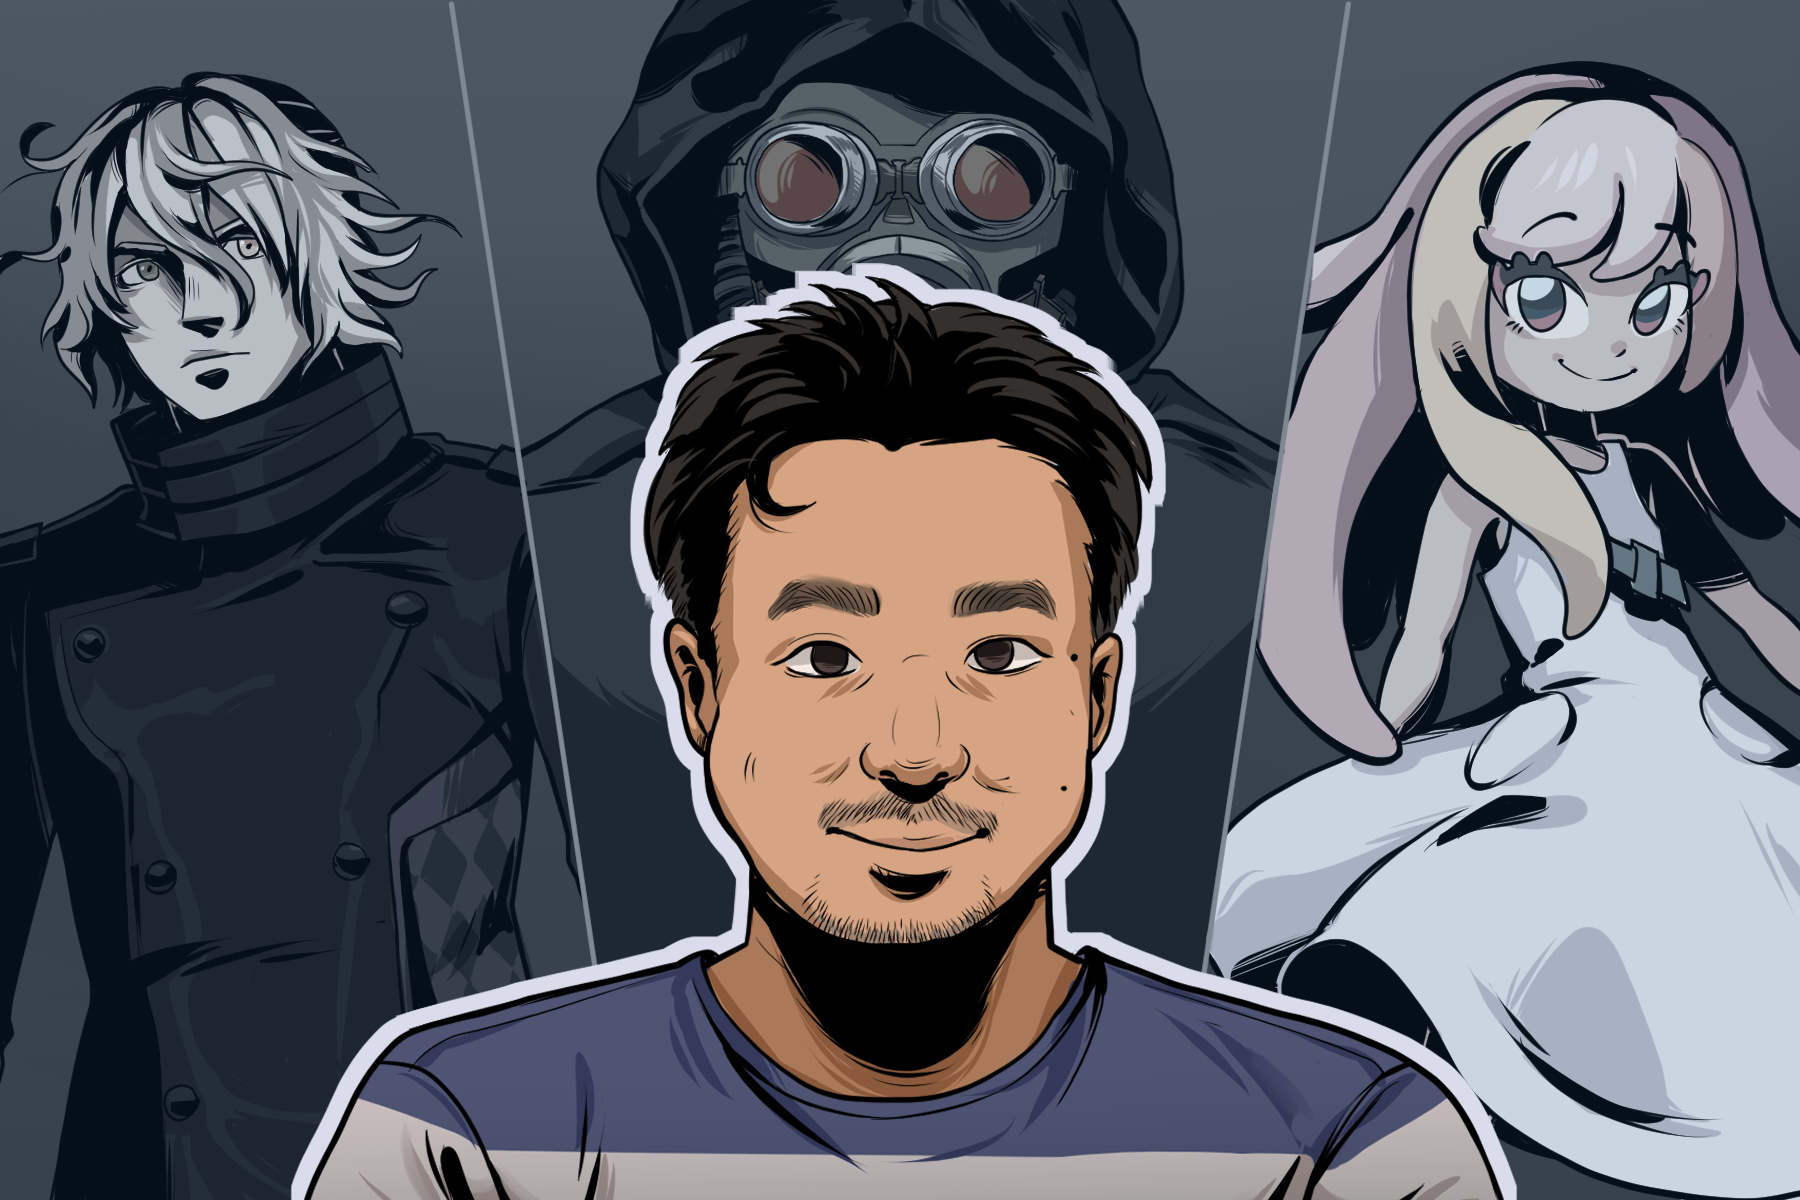 In an article about Kotaro Uchikoshi, an illustration of him and some of his characters.